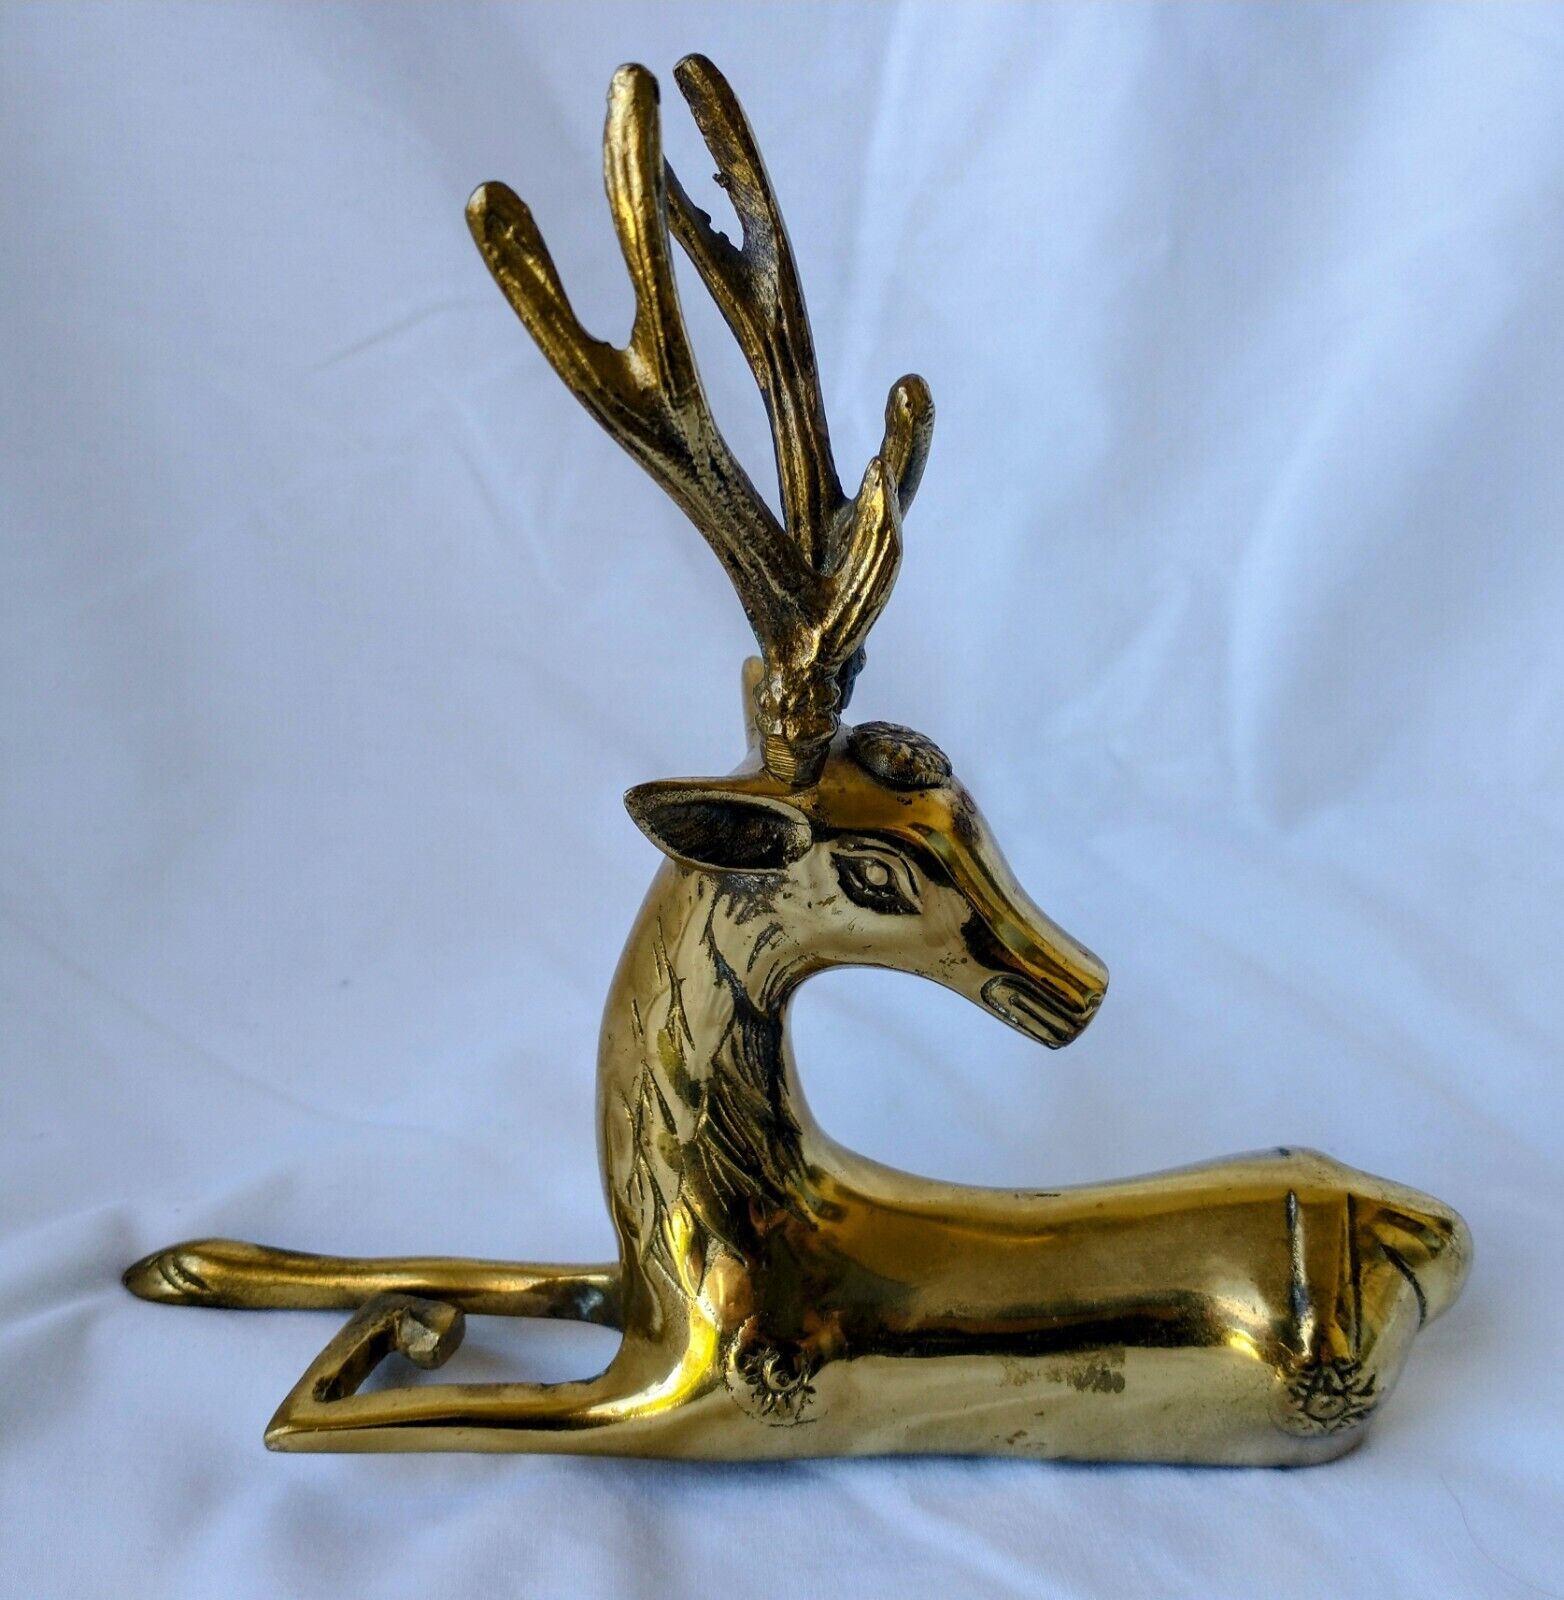 Vintage MCM Brass Stag Deer Buck Figurine, 7.25 by 6.5 inches tall